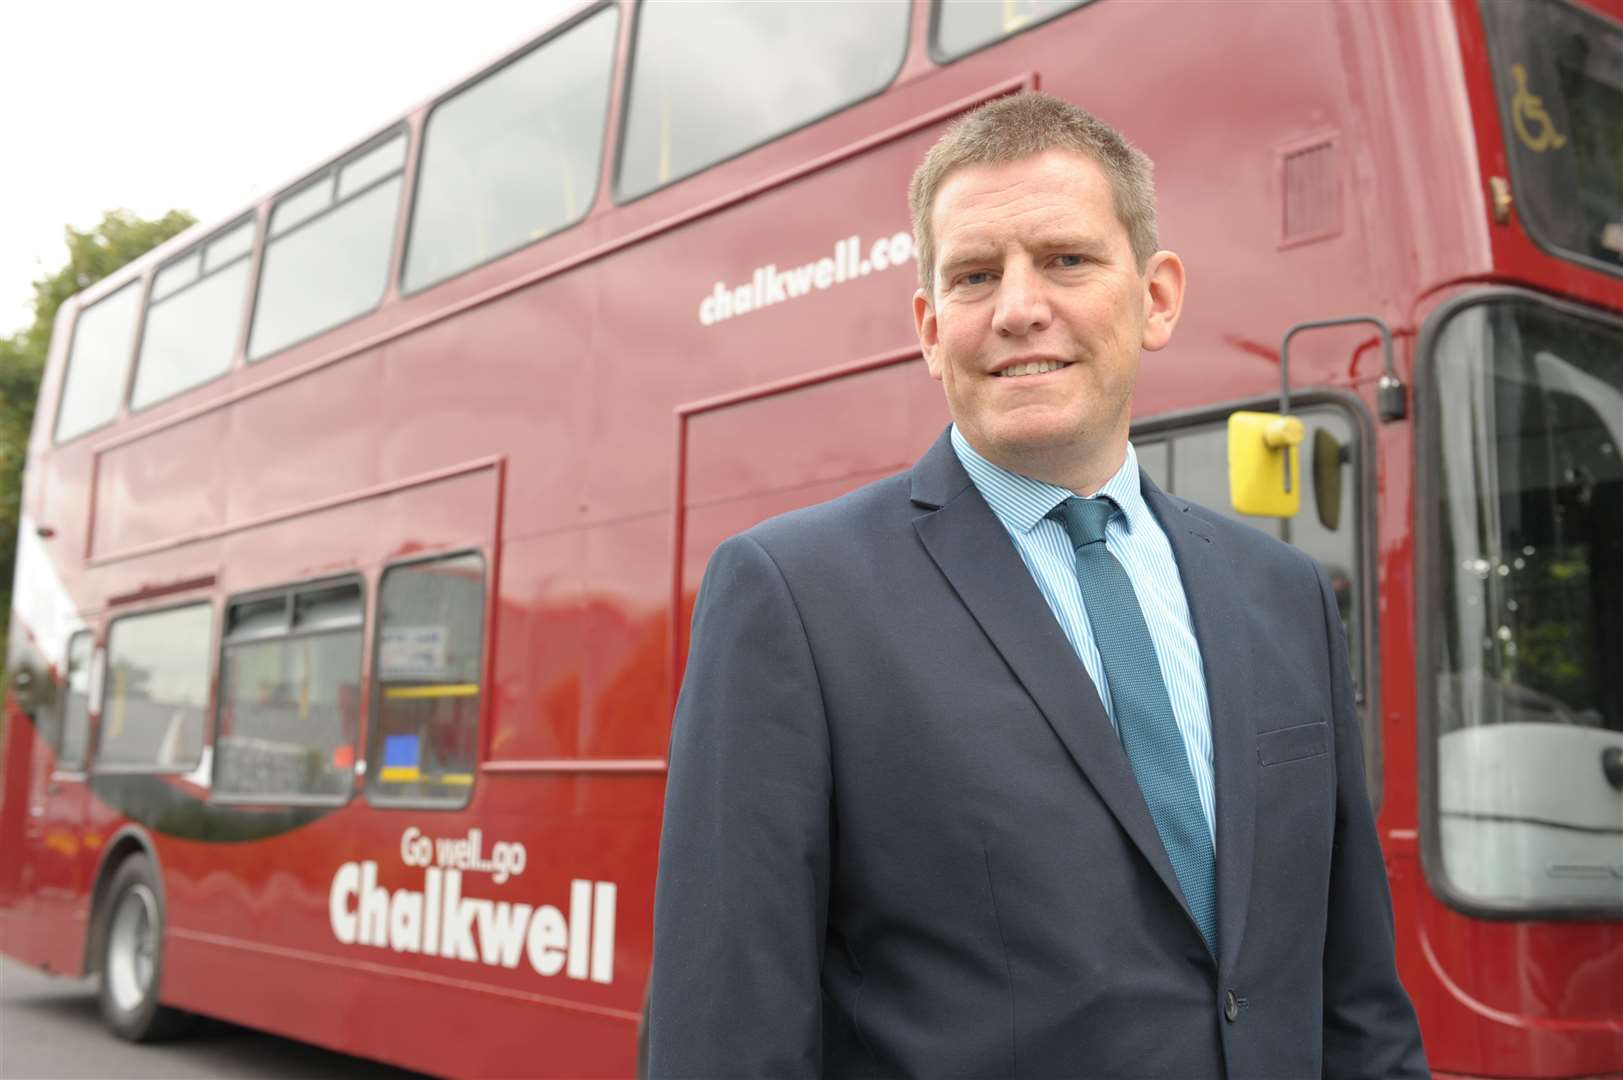 Roland Eglinton, managing director of Chalkwell Coach Hire, Sittingbourne, hopes the scheme will get more people using buses